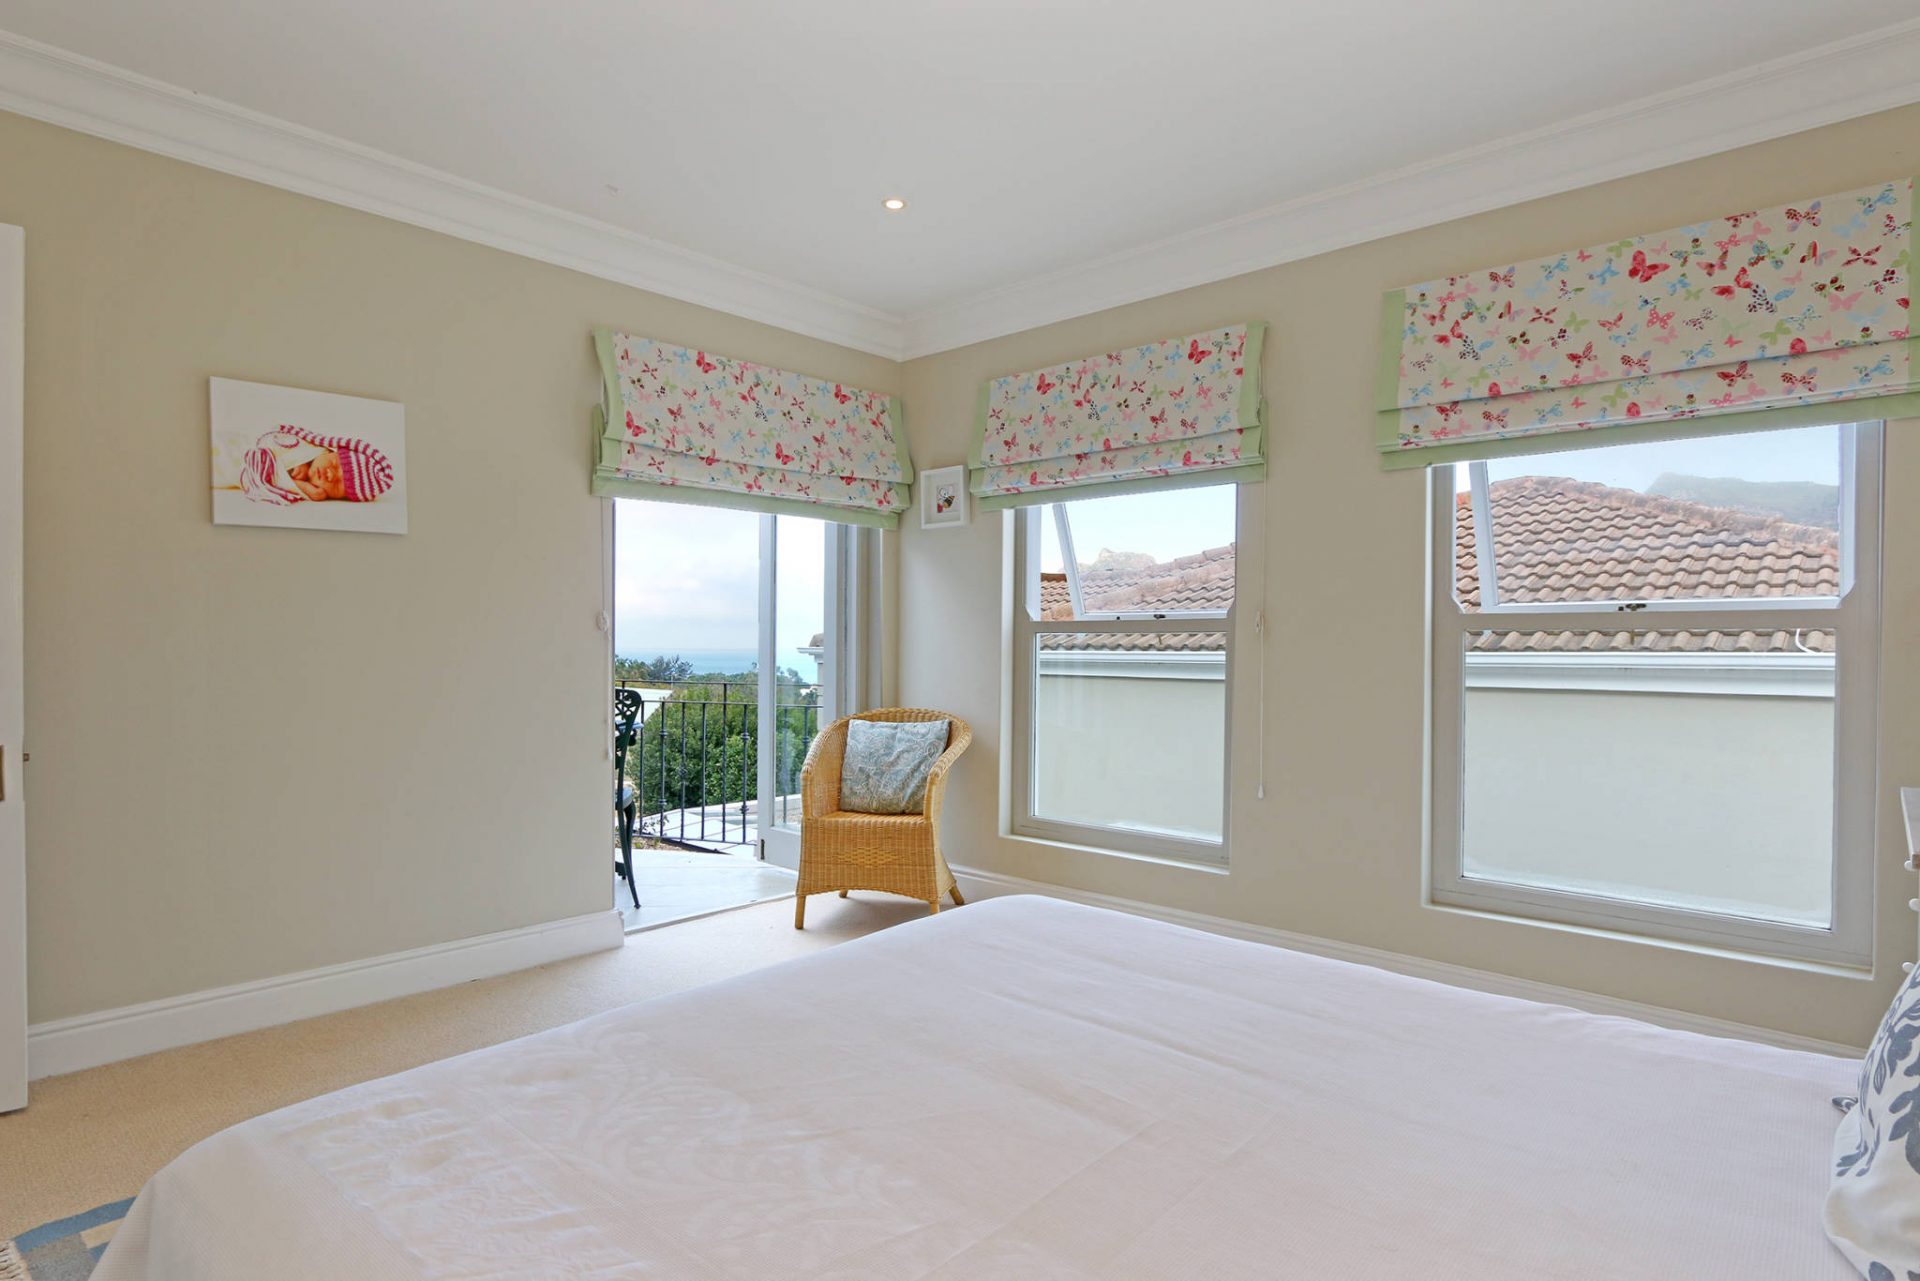 Photo 4 of King Street Villa accommodation in Hout Bay, Cape Town with 3 bedrooms and 2 bathrooms